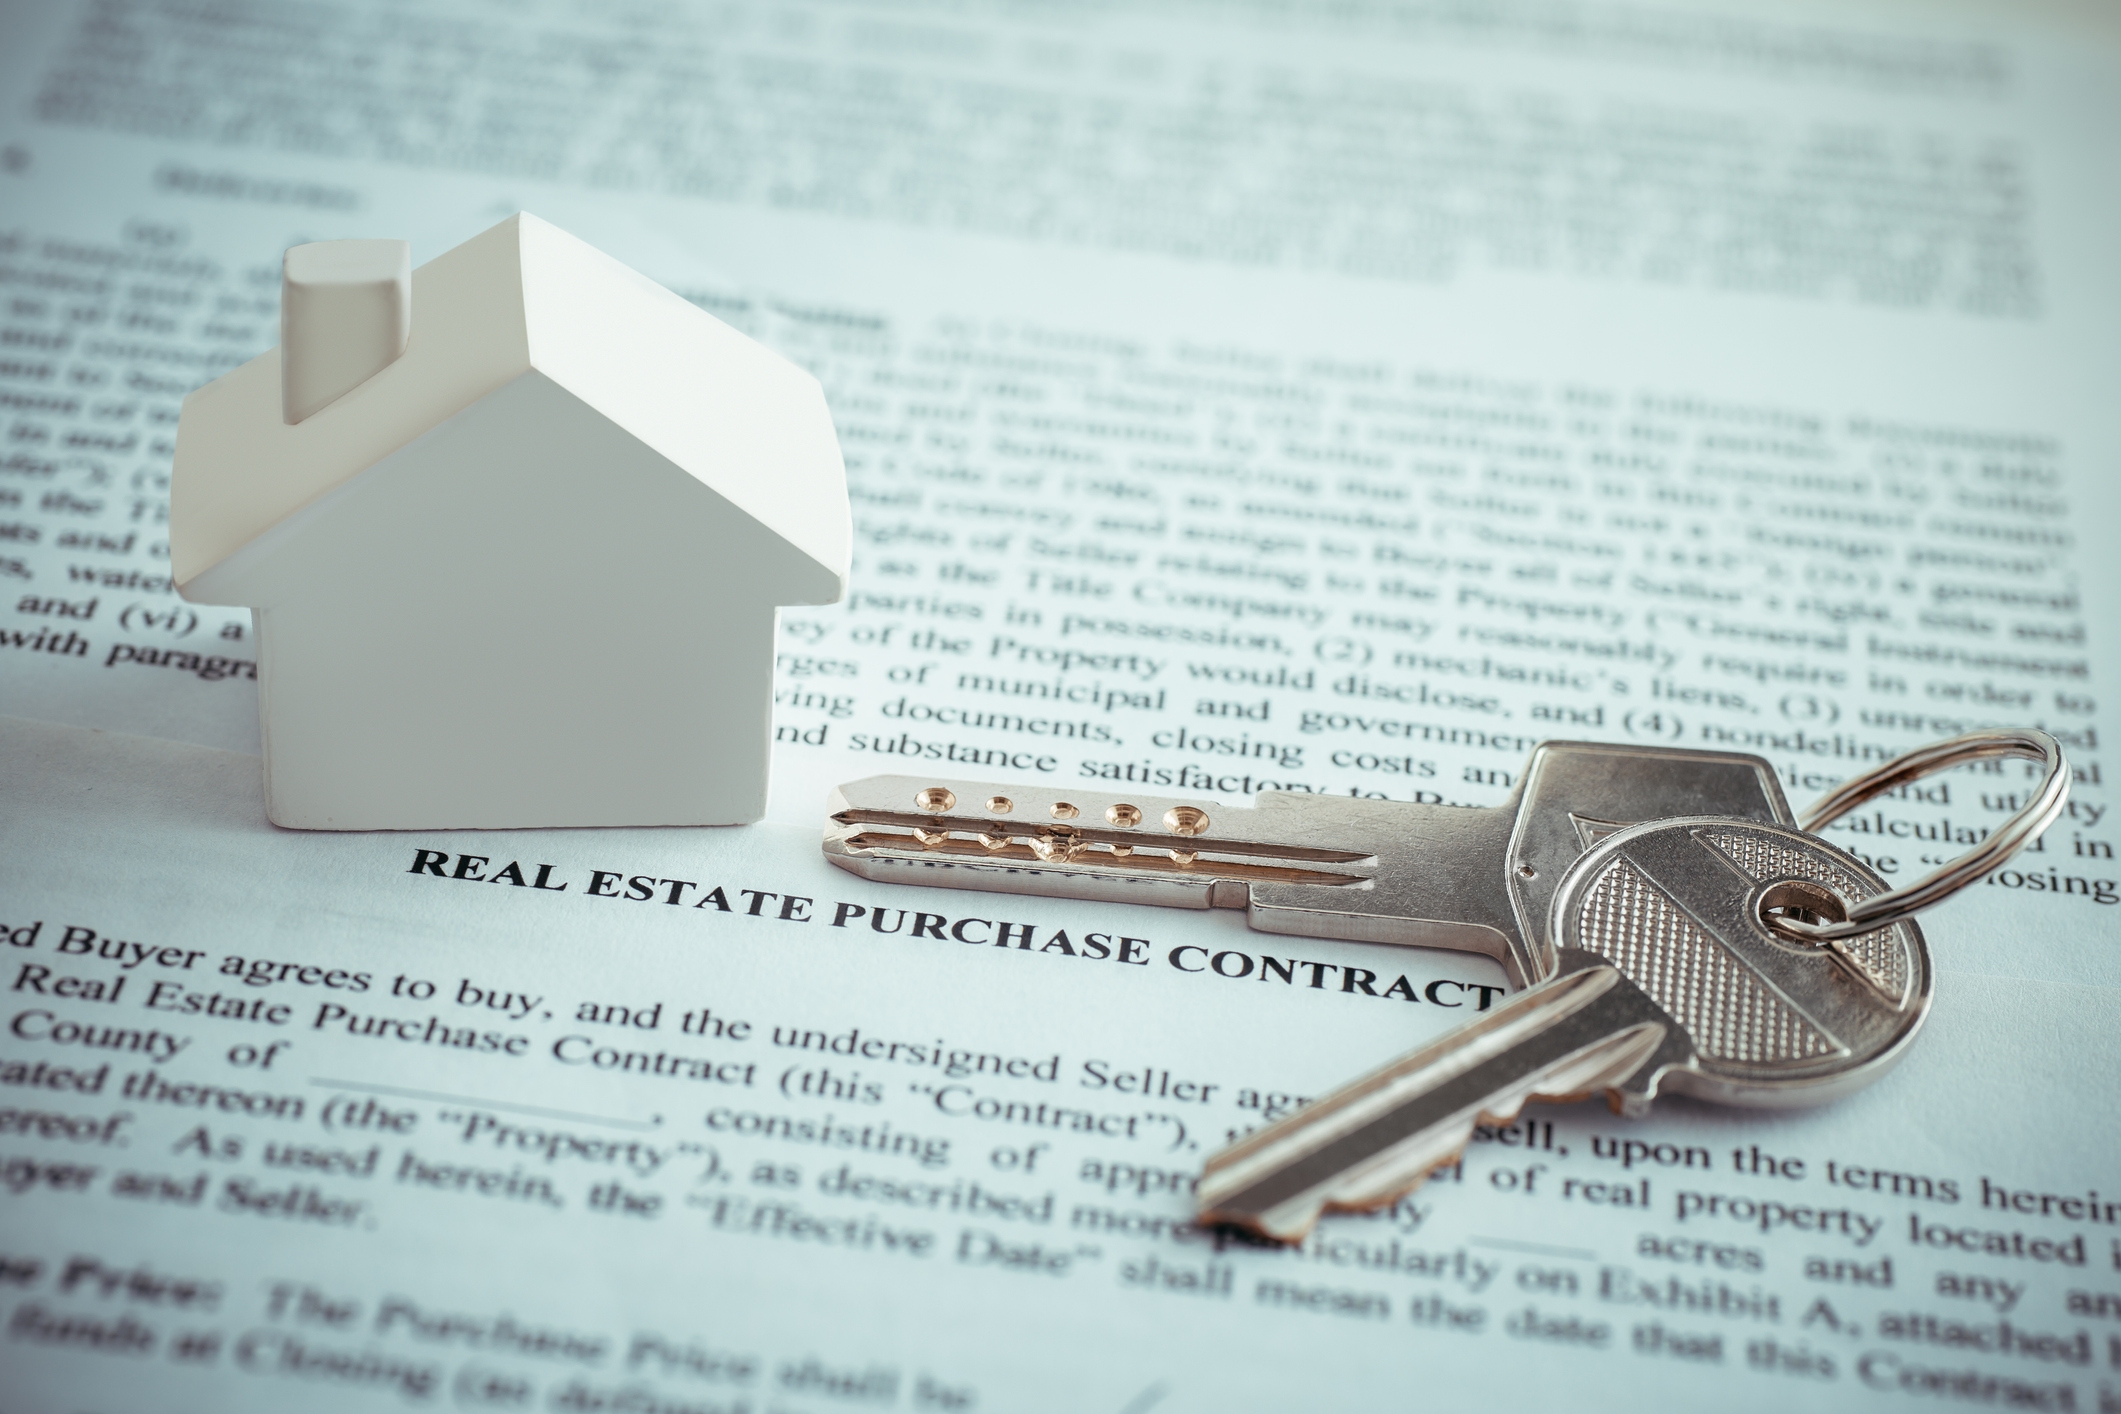 Real Estate Purchase Contract with a house key